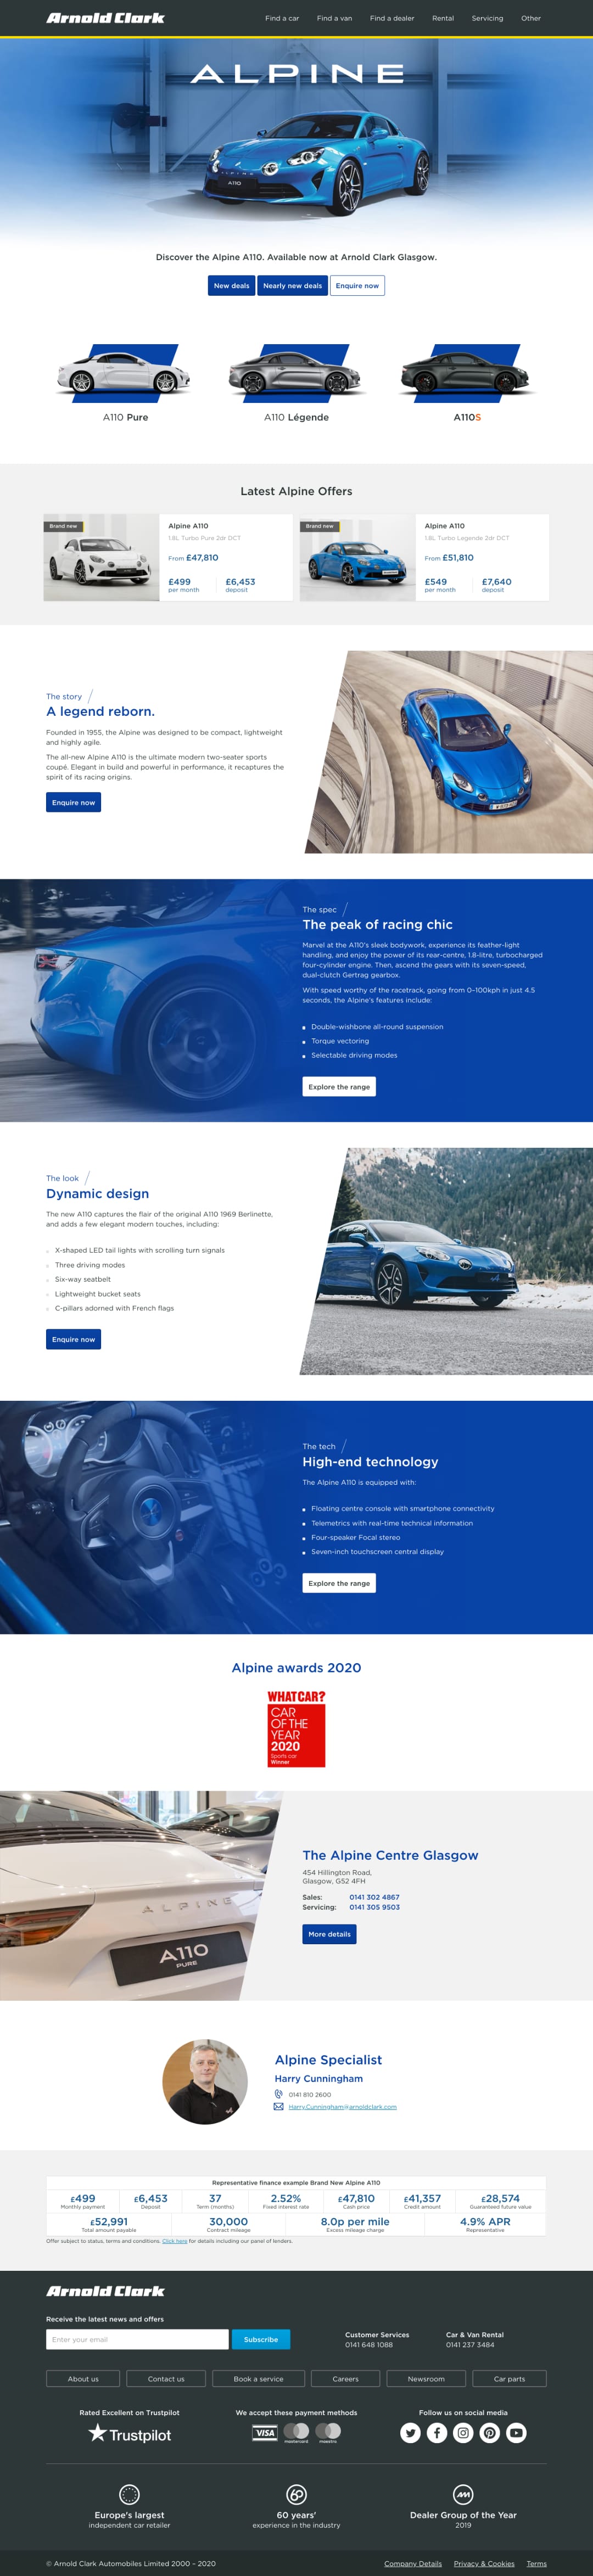 Alpine landing page for the A110 model